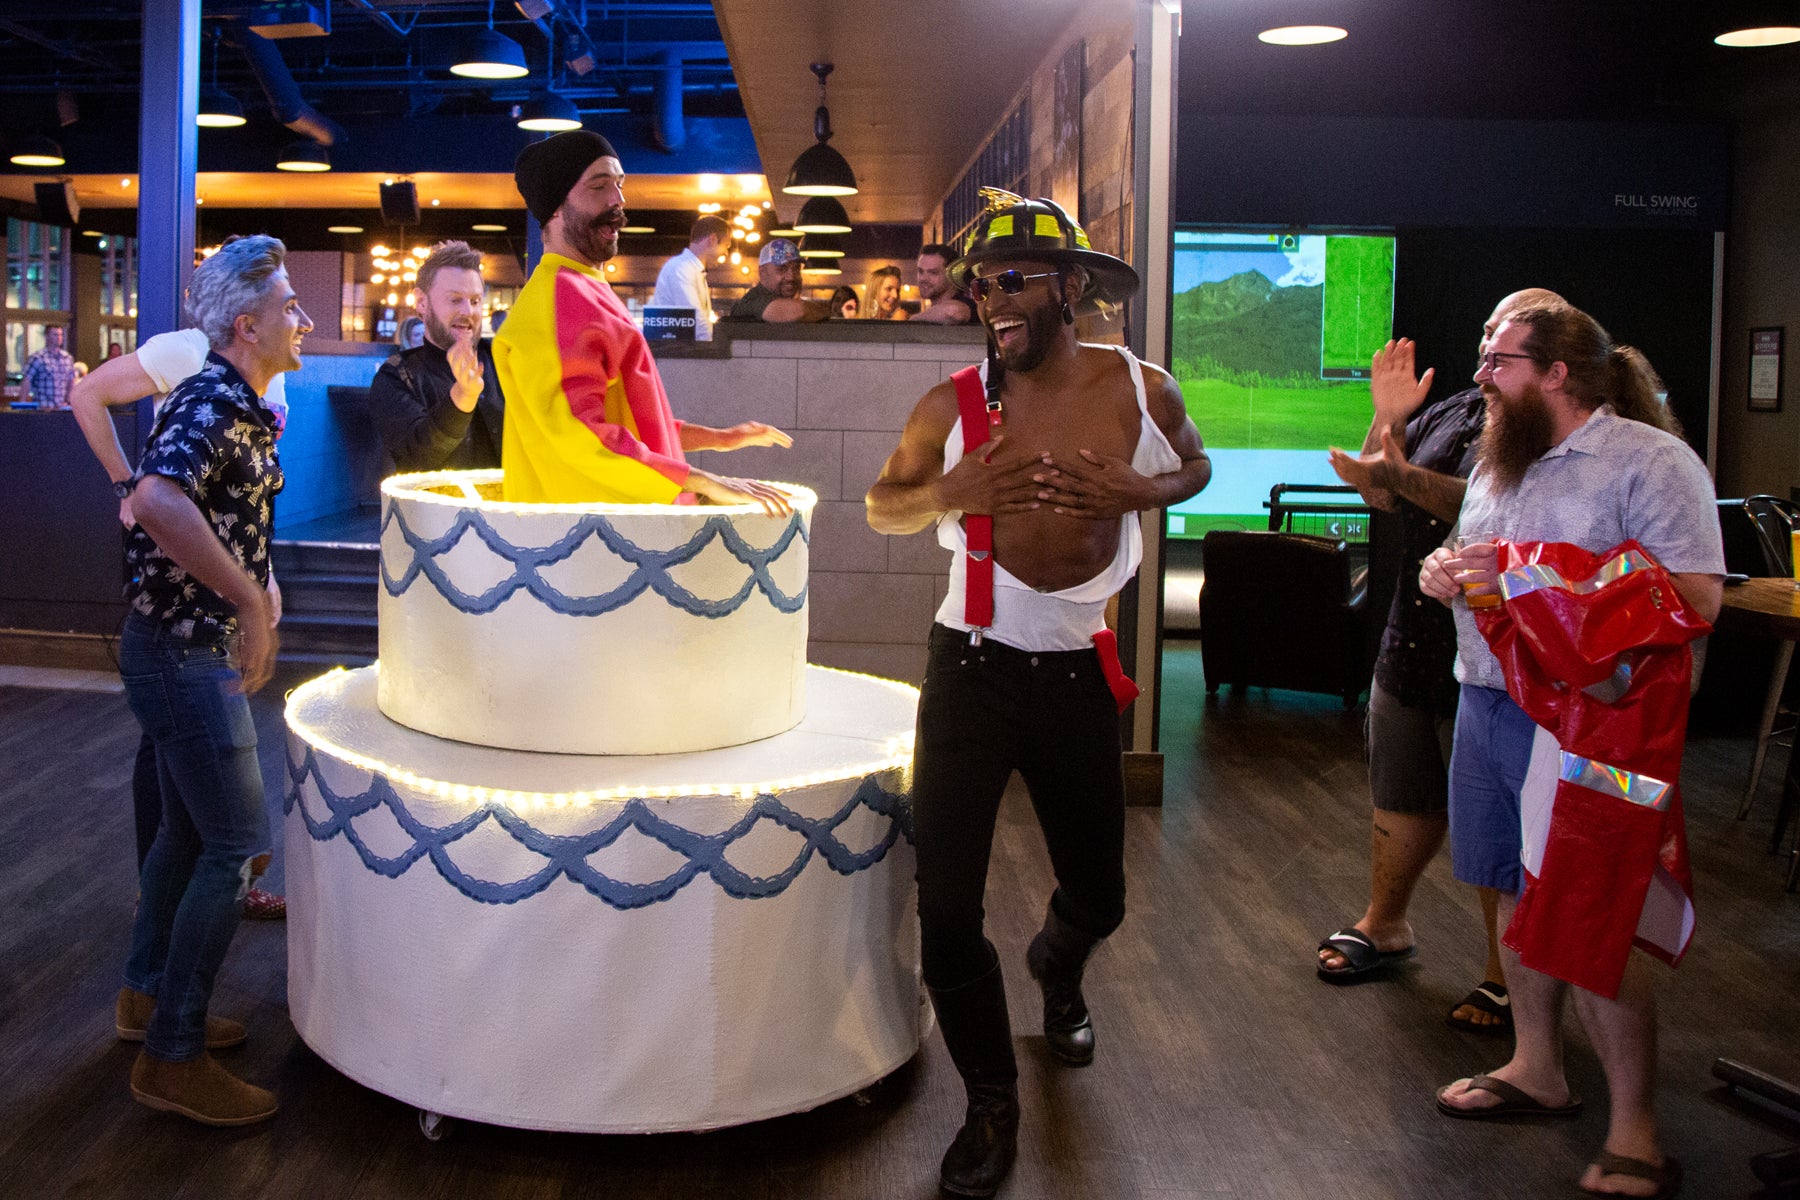 Jonathan stands in an oversized cake, and Karamo dances in a firefighter hat, while the cast of Queer Eye watches.